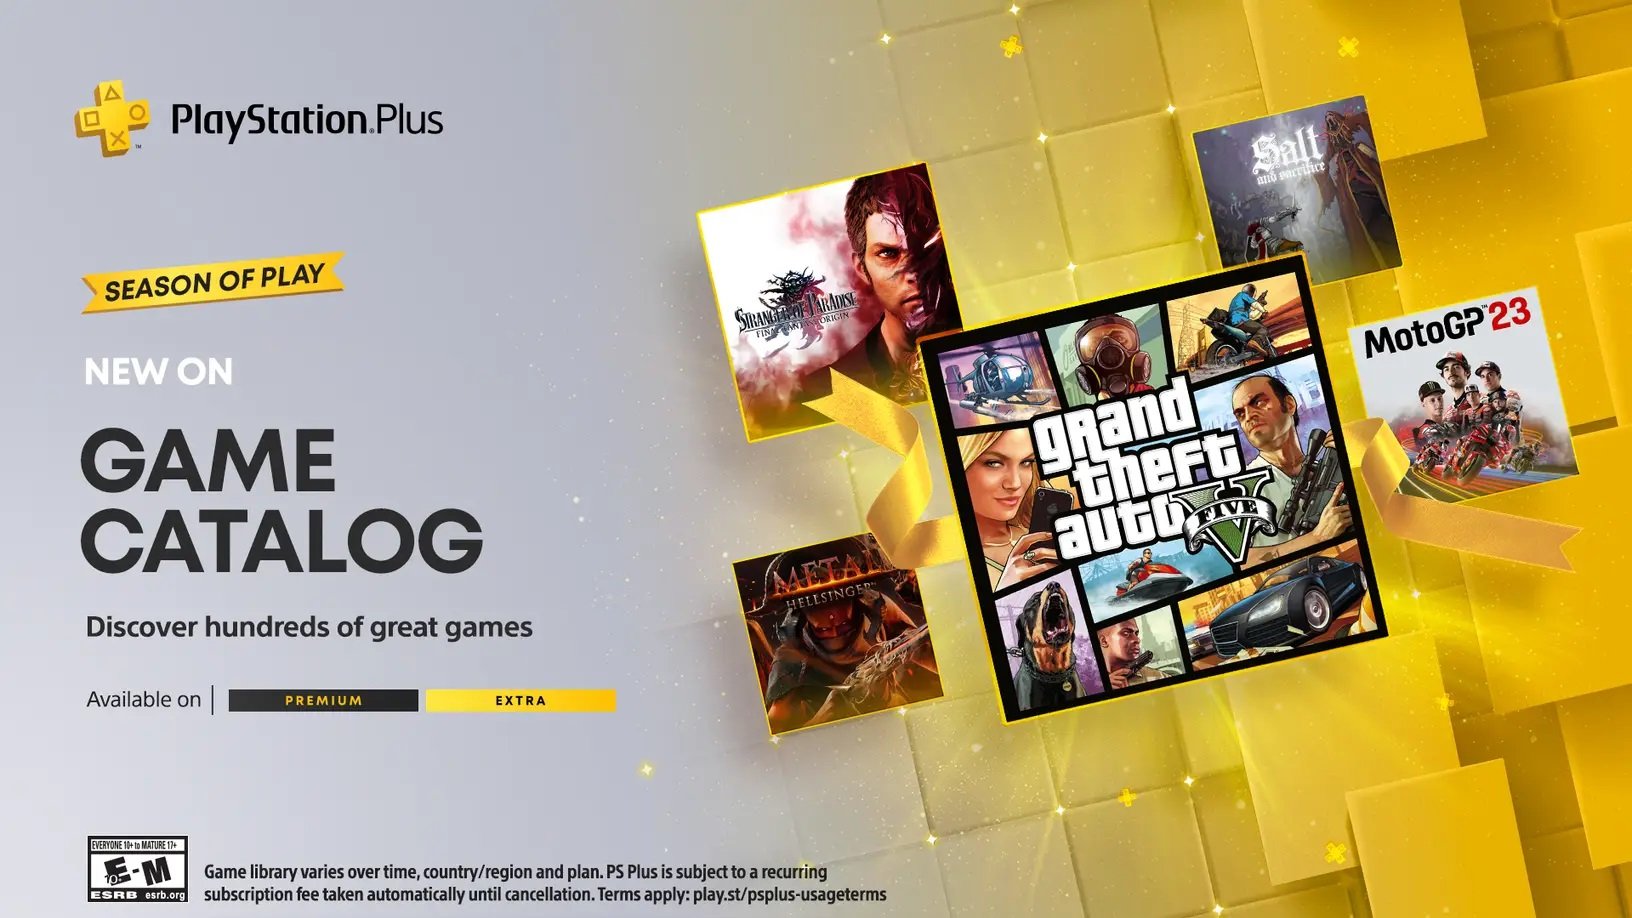 September's PlayStation Plus Essential, Extra and Premium games